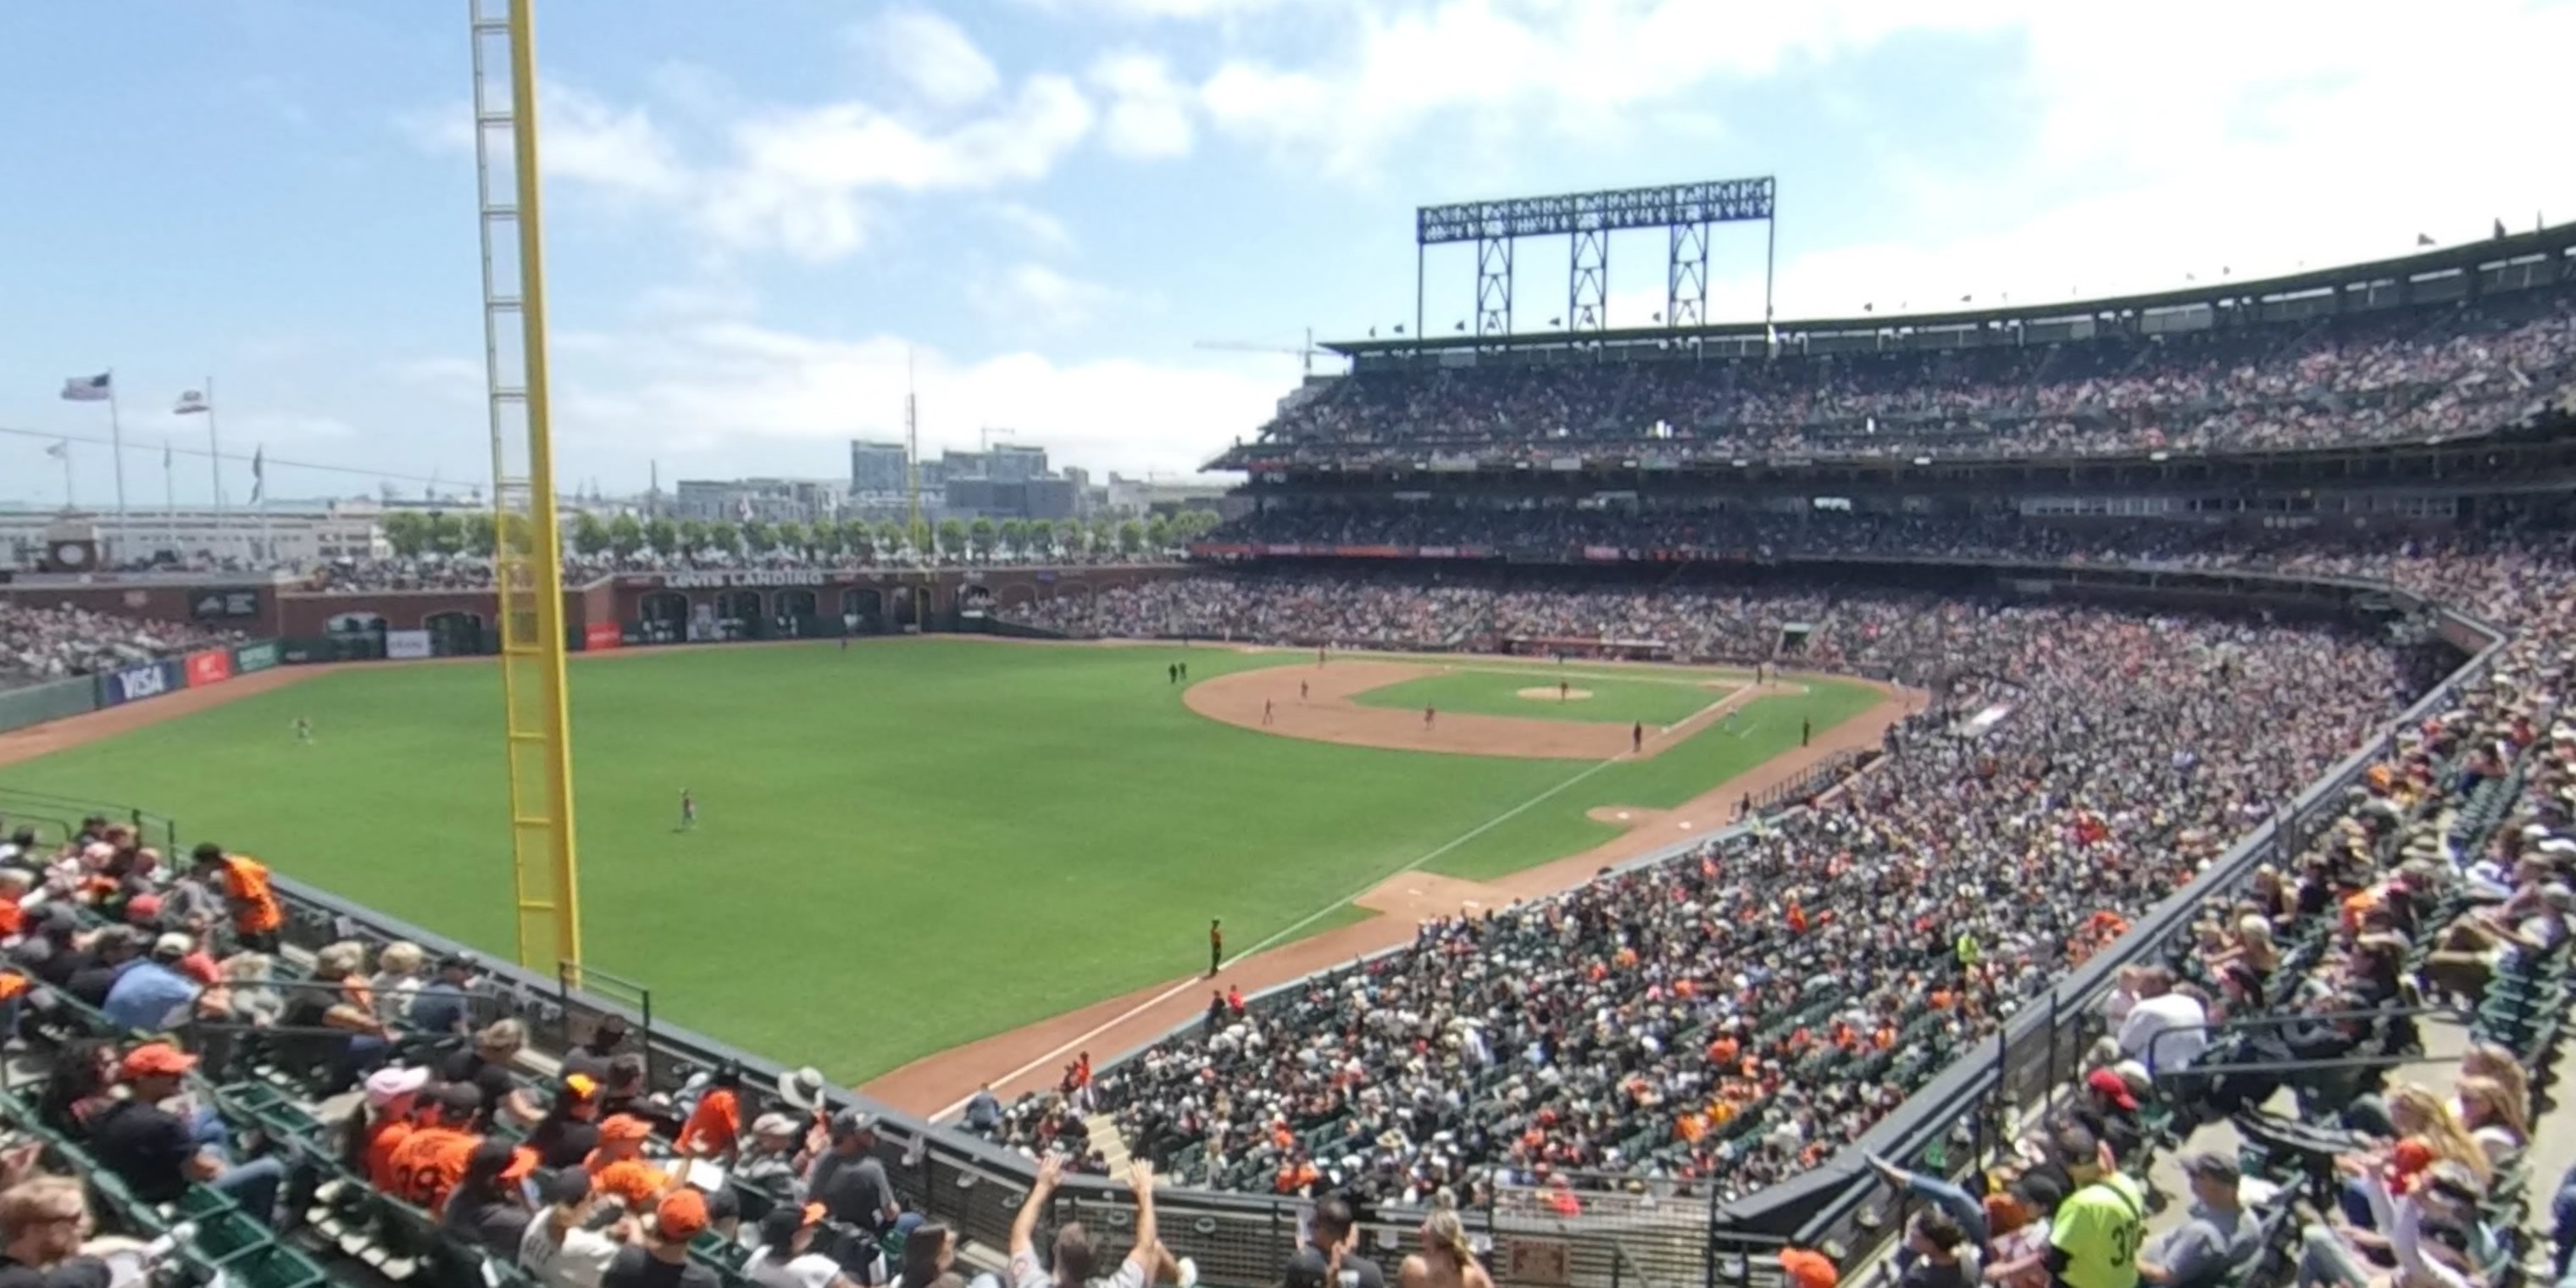 section 232 panoramic seat view  for baseball - oracle park